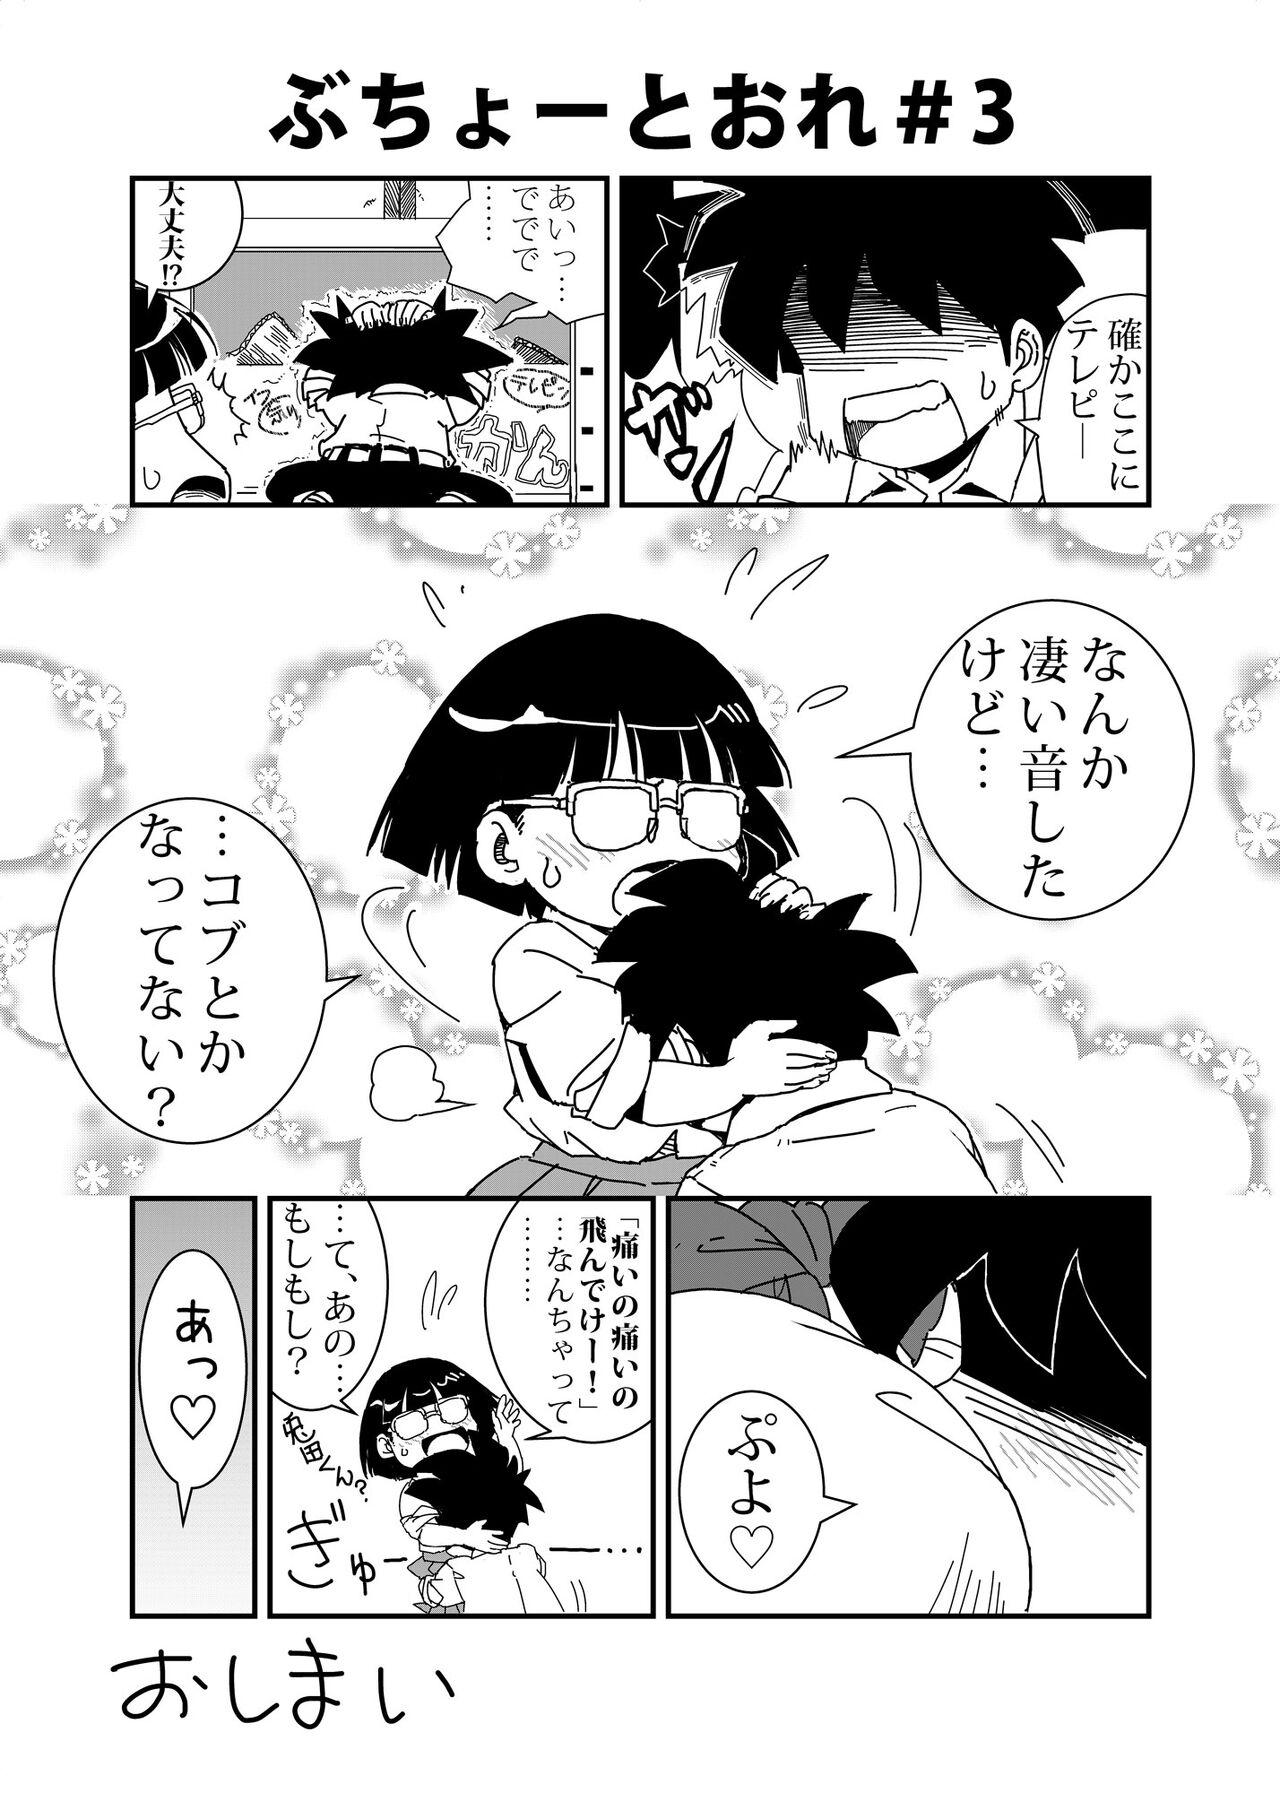 Gaystraight Buchou to Ore - Original  - Page 3